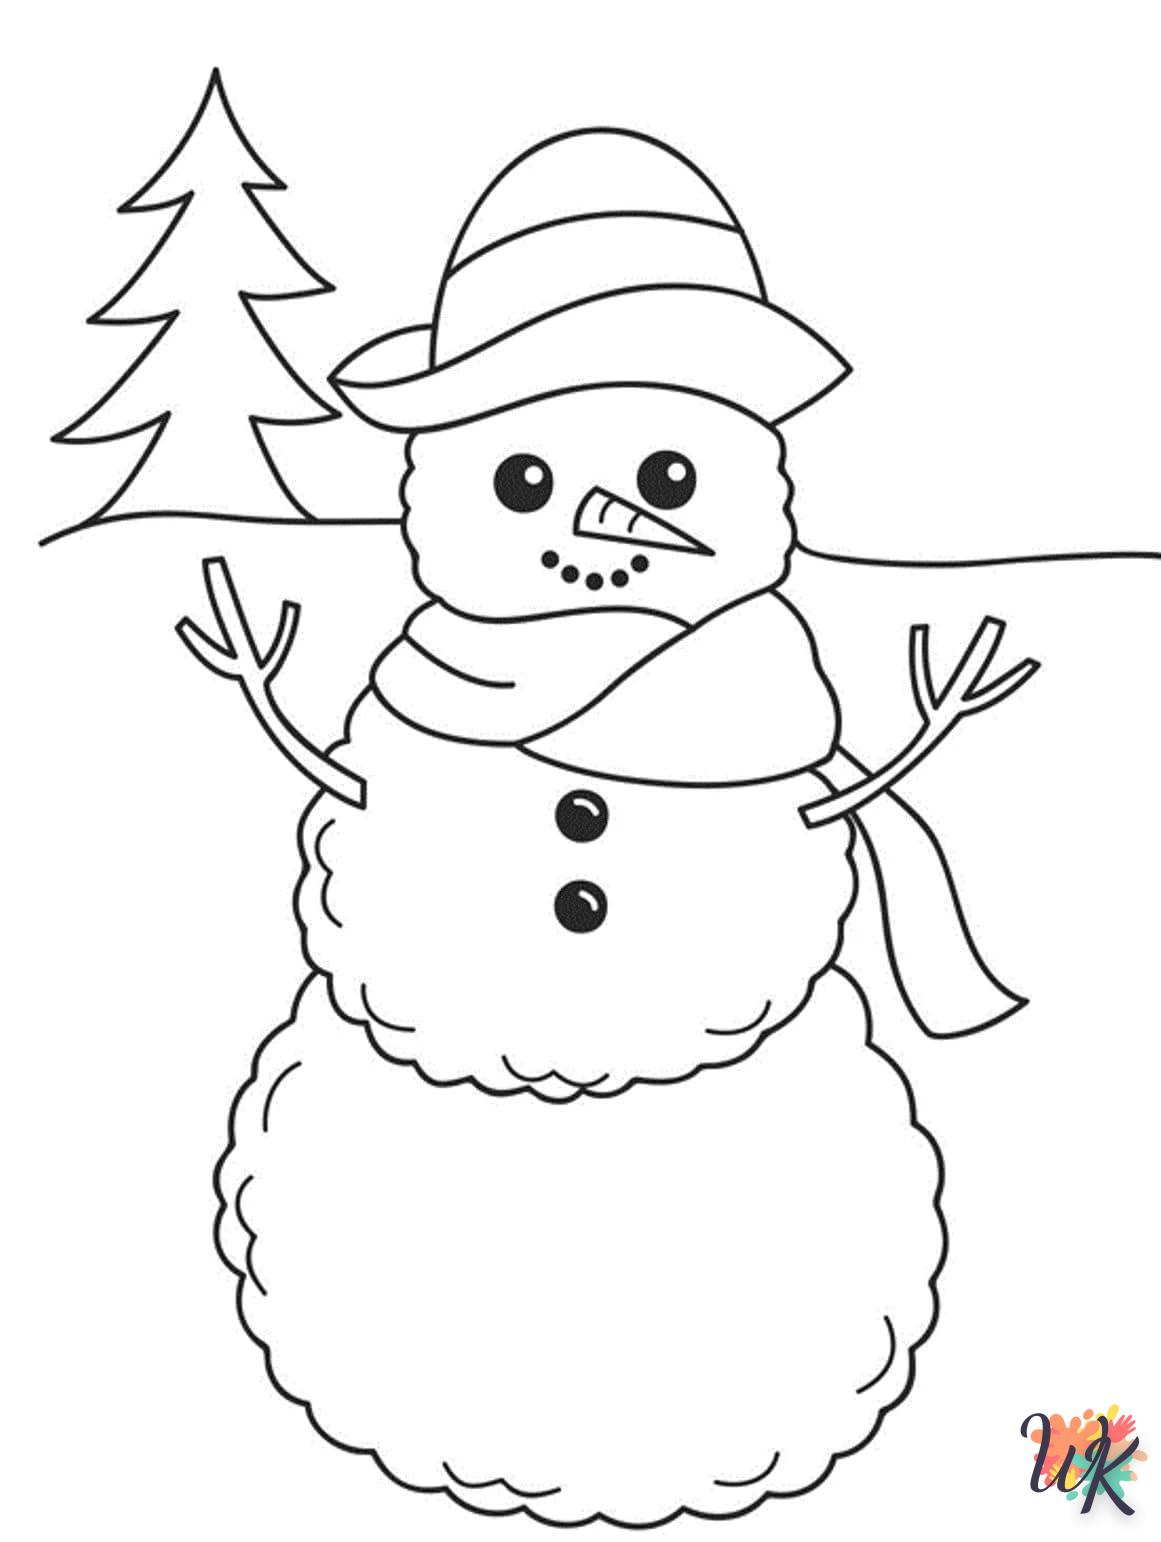 Snowman coloring page for children to print pdf